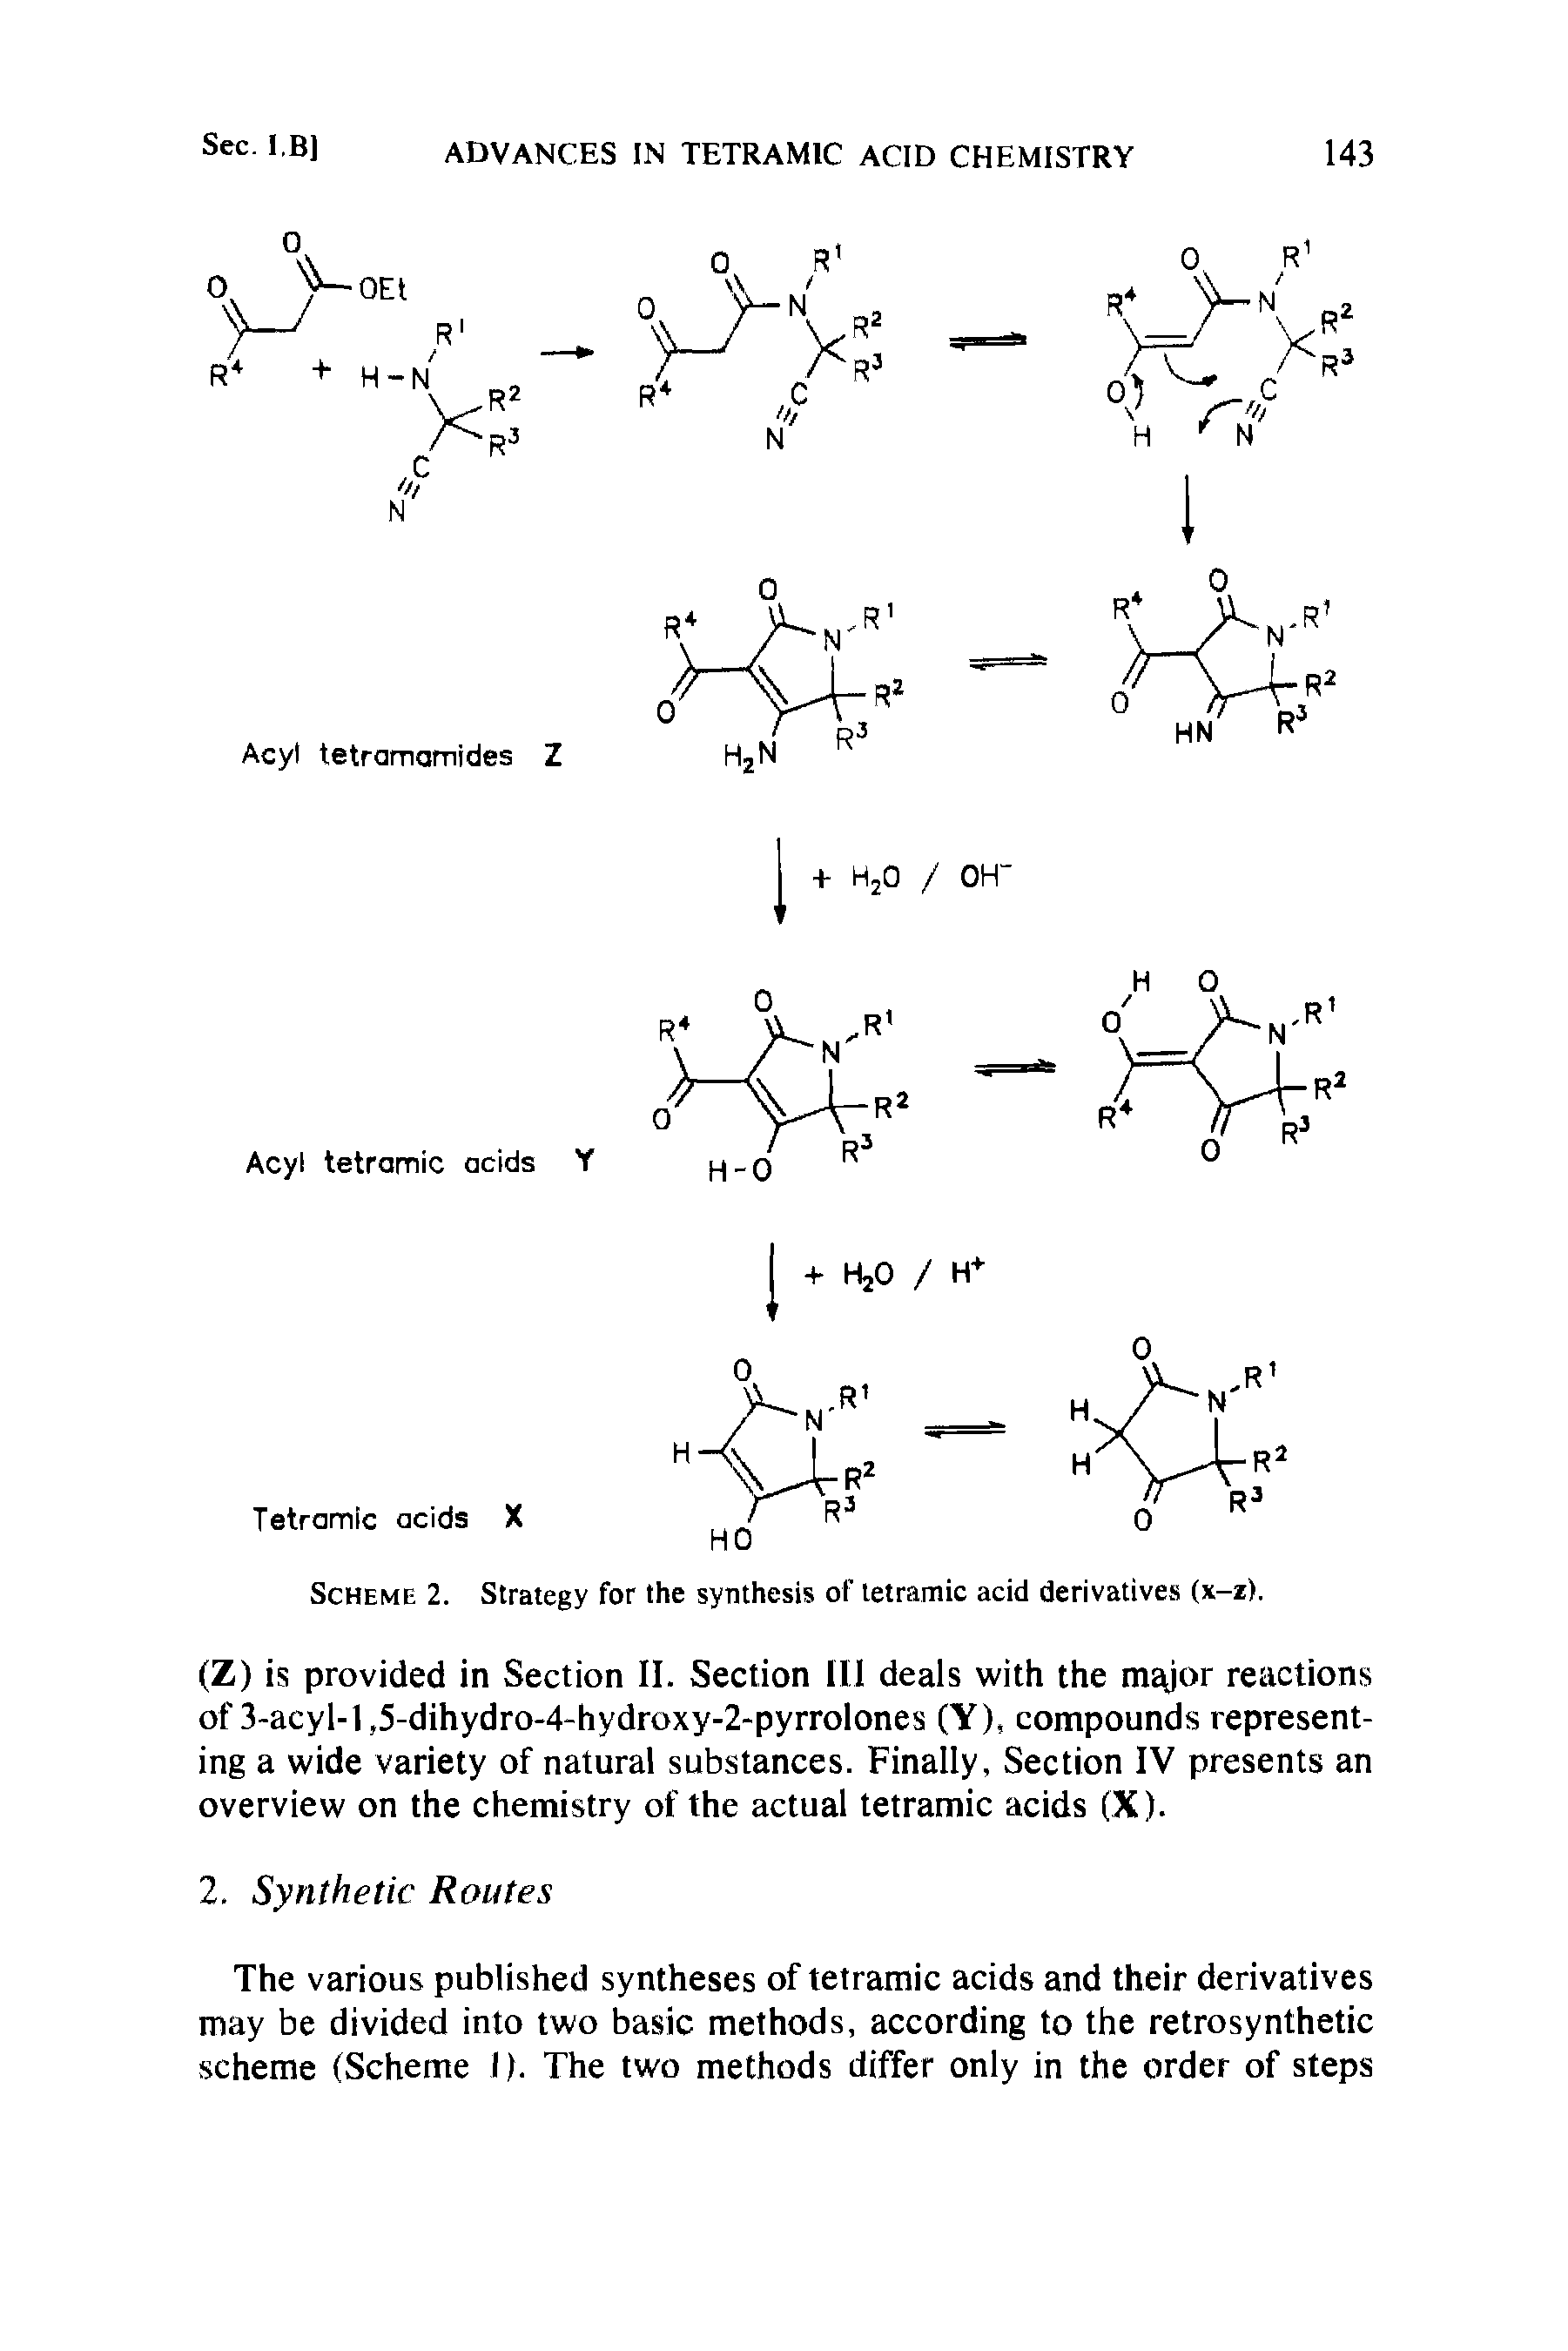 Scheme 2. Strategy for the synthesis of tetramic acid derivatives (x-z).